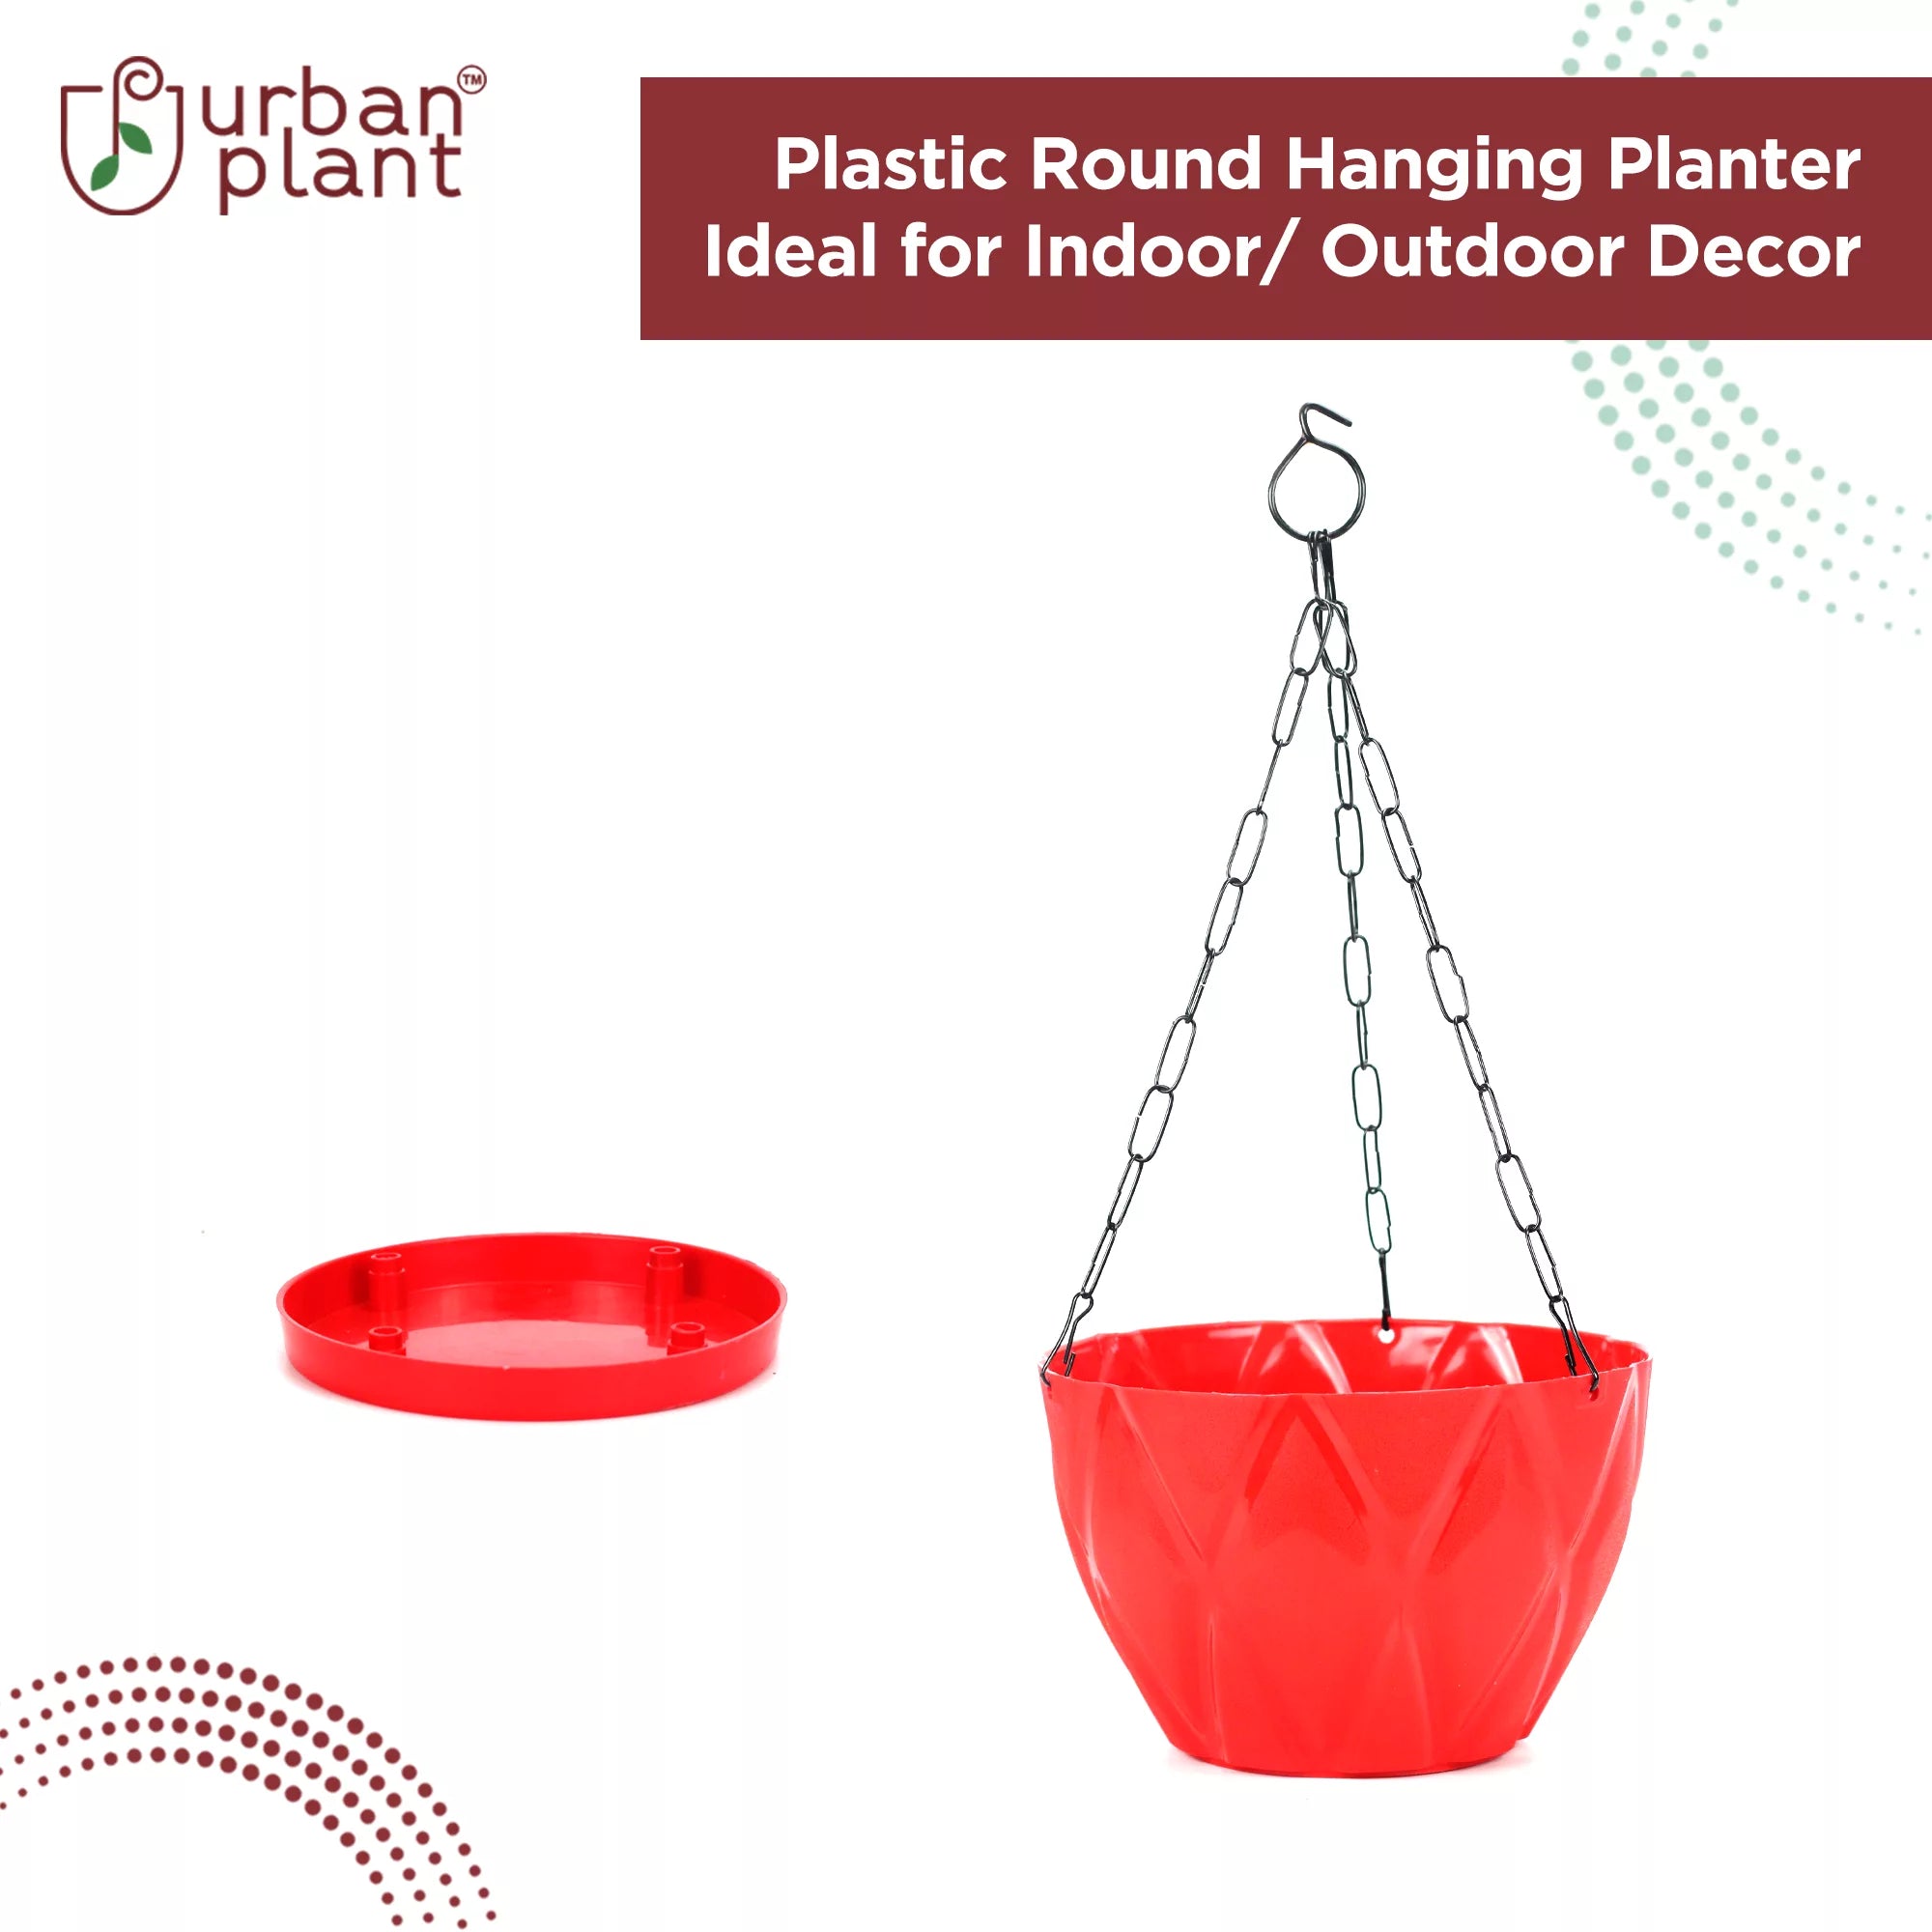 Plastic Hooked Hanging Planter Pot With Bottom Tray Hanging Planter Urban Plant 